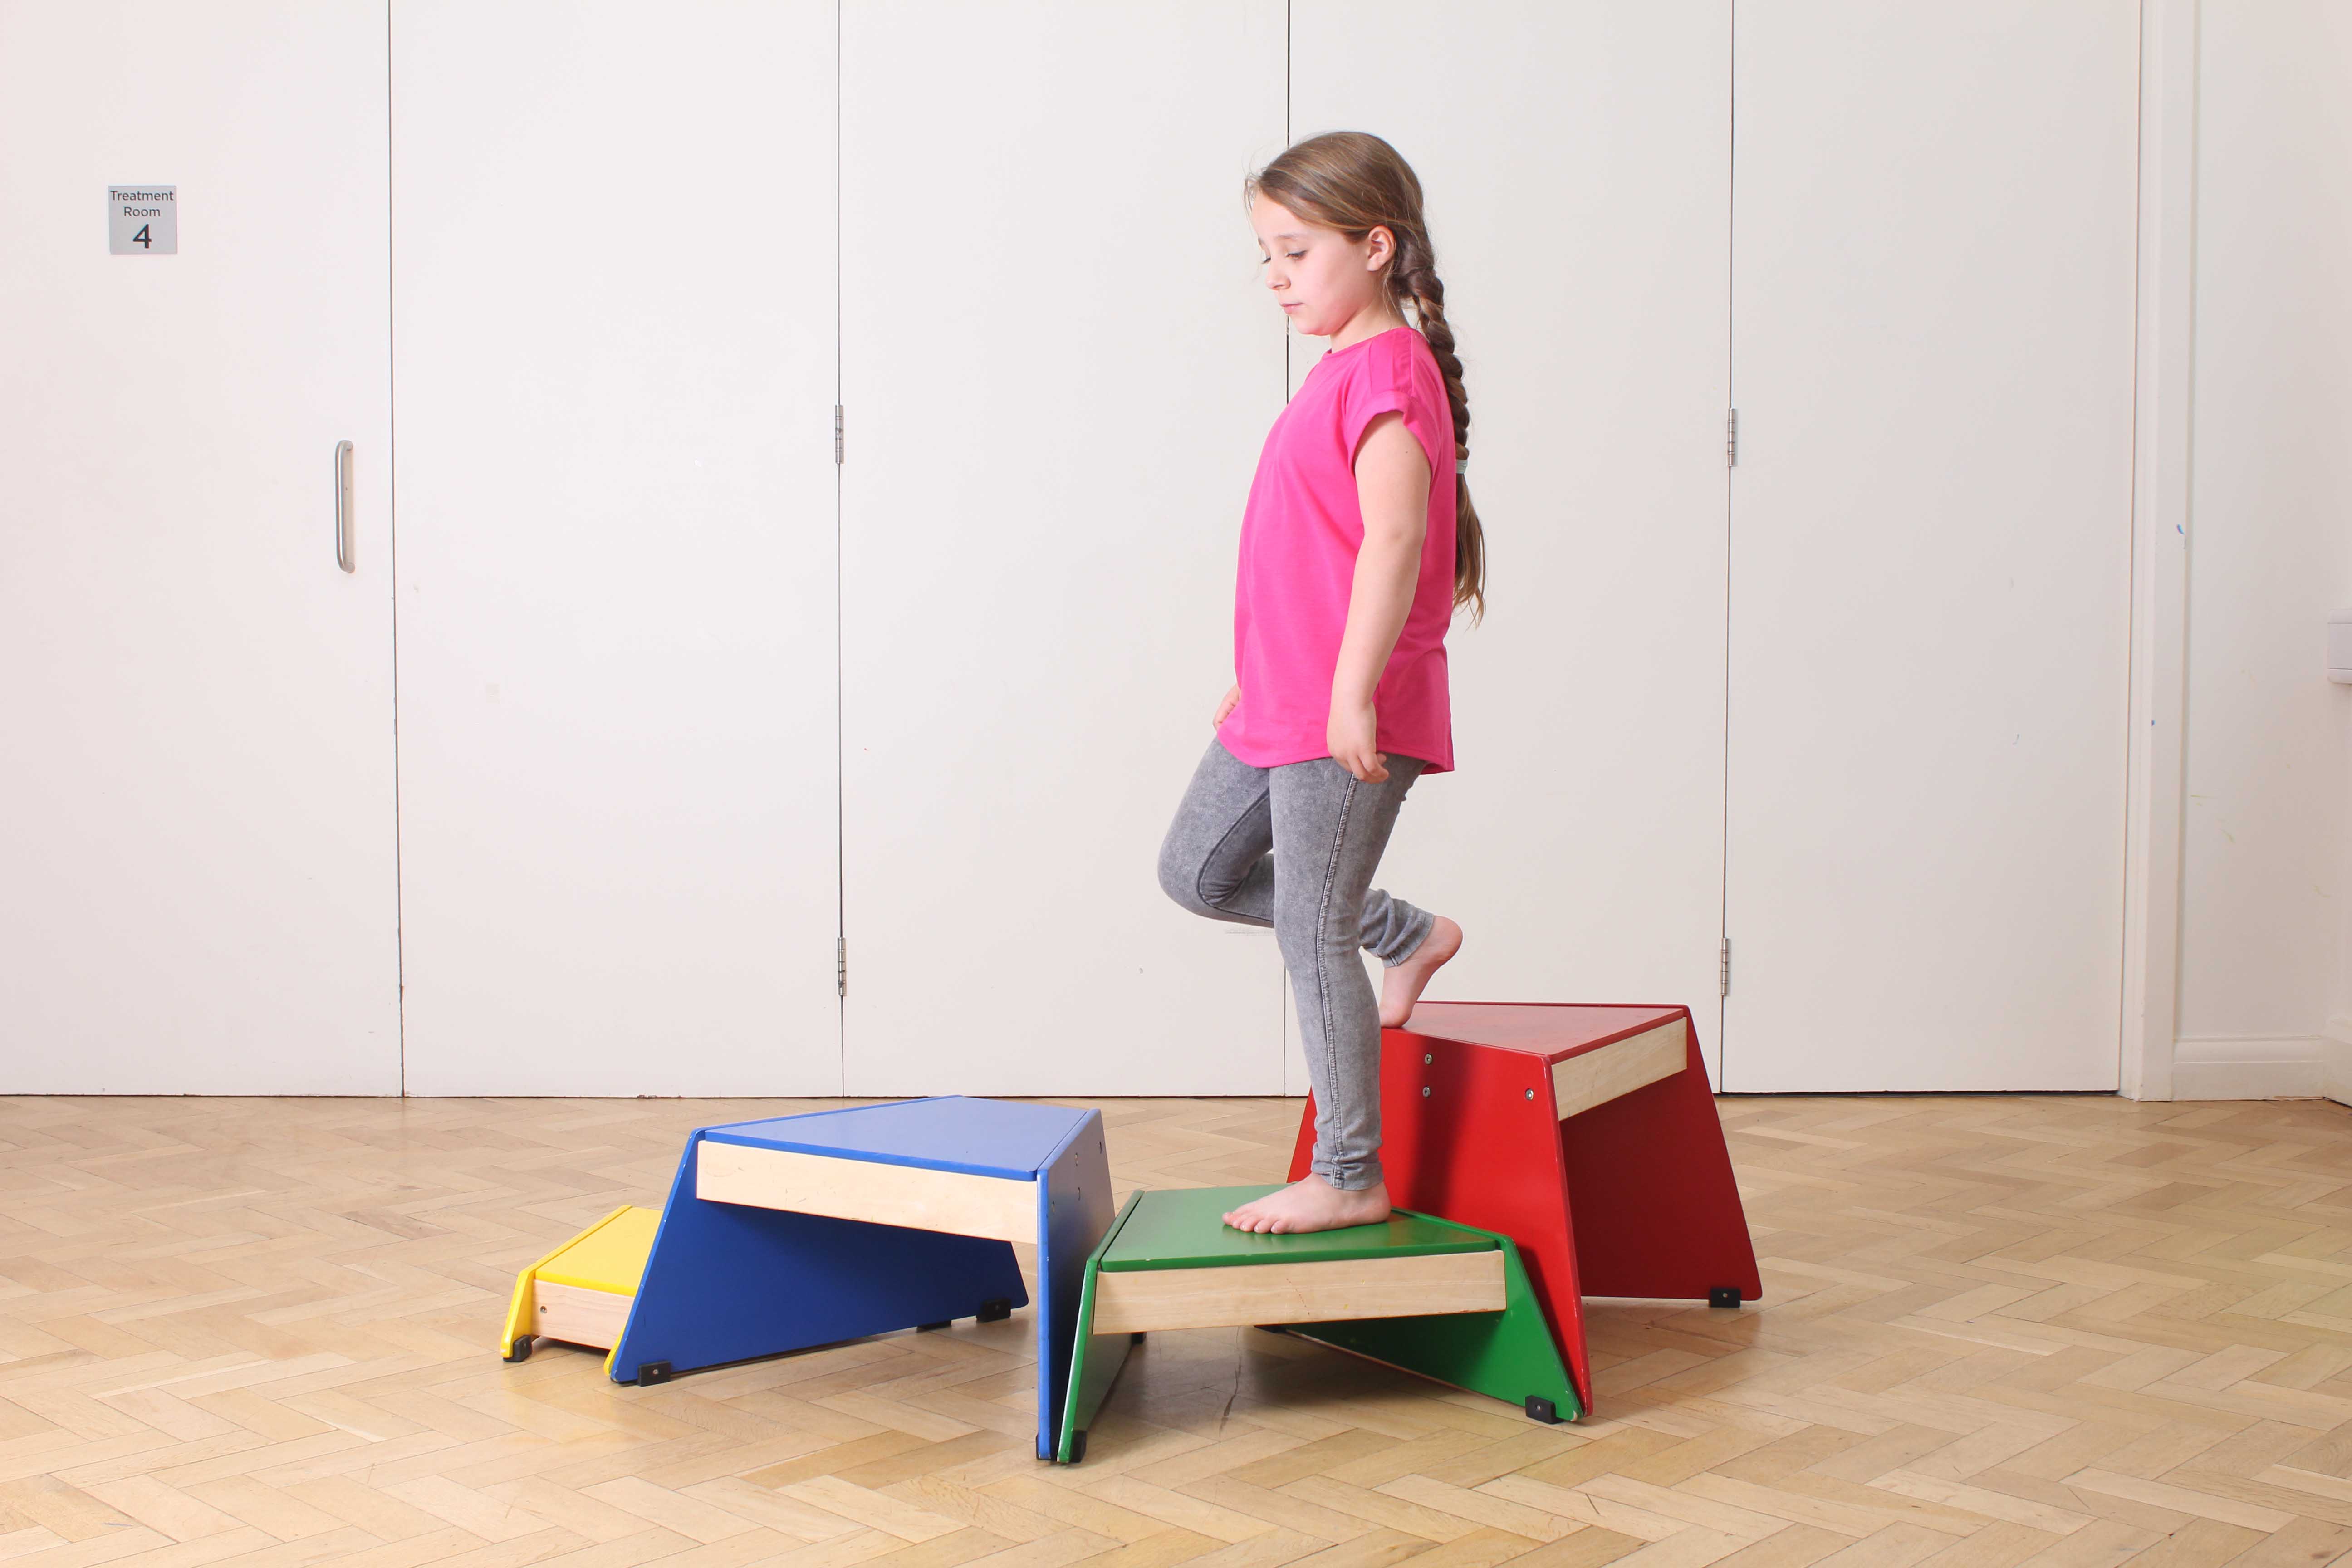 Mobility exercises to address heel pain supervised by a paediatric physiotherapist